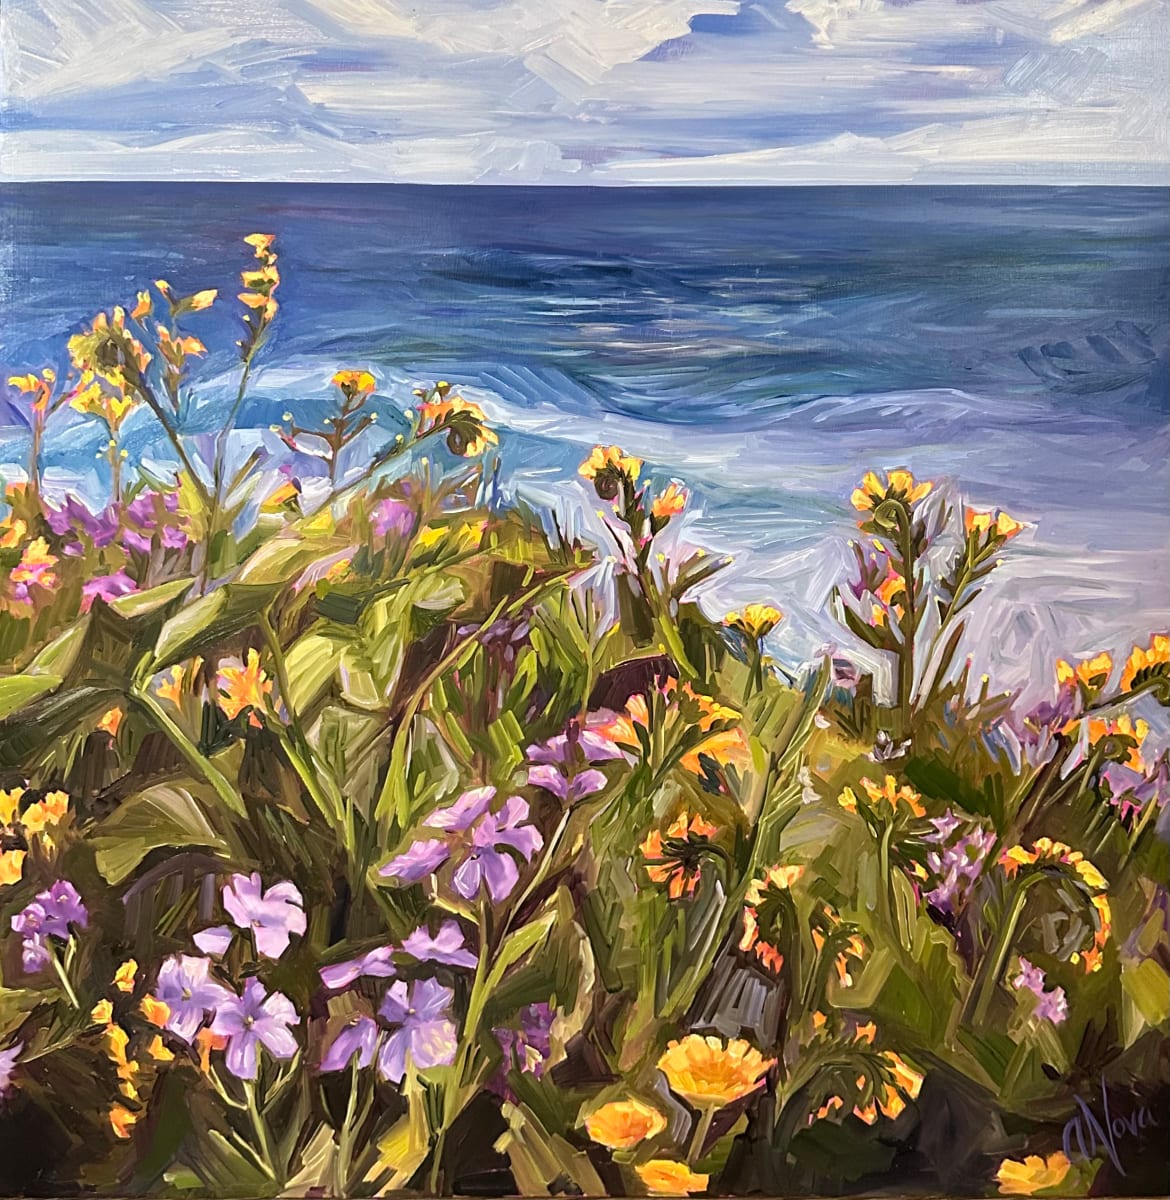 Beacons Wildflowers by Andrea Nova  Image: Painted during one of the wettest and cloudiest winters in Southern California that I can remember. Despite the constant rain, Southern California experienced a Super Bloom. In this painting featuring a view of Encinitas' popular surf spot, Beacons, I aimed to capture the vibrant display of wildflowers. I used my artistic license to portray it as a clear day because I was tired of the reality of endless clouds.